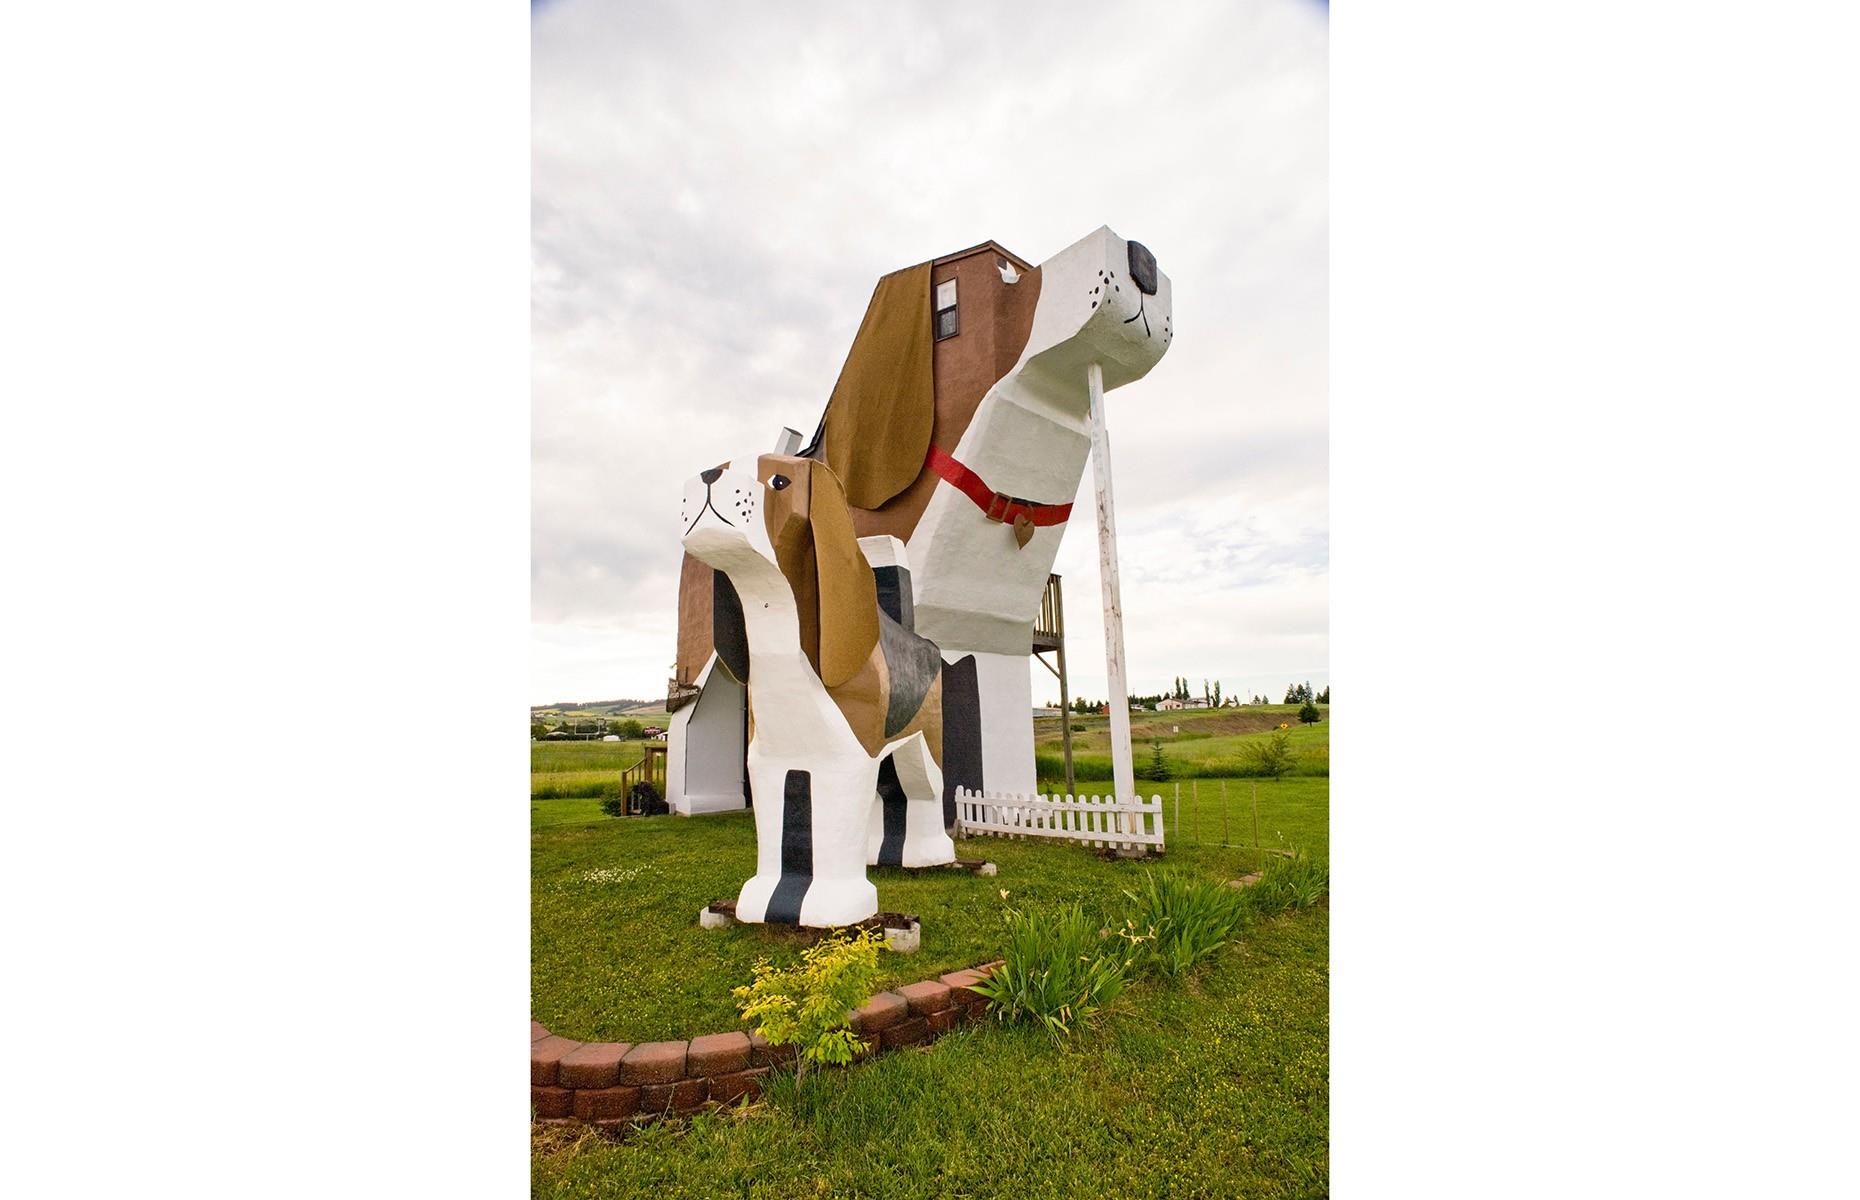 <p>Just off the US-95, this 12-foot-tall sculpture of a giant beagle used to double as a place to stay, but now it's just a quirky (and free) roadside attraction. The 'dog house' was handcrafted by the original owners using a chainsaw.</p>  <p>They also created the series of sculptures, including a smaller dog and a fire hydrant, that dot the grassy grounds.</p>